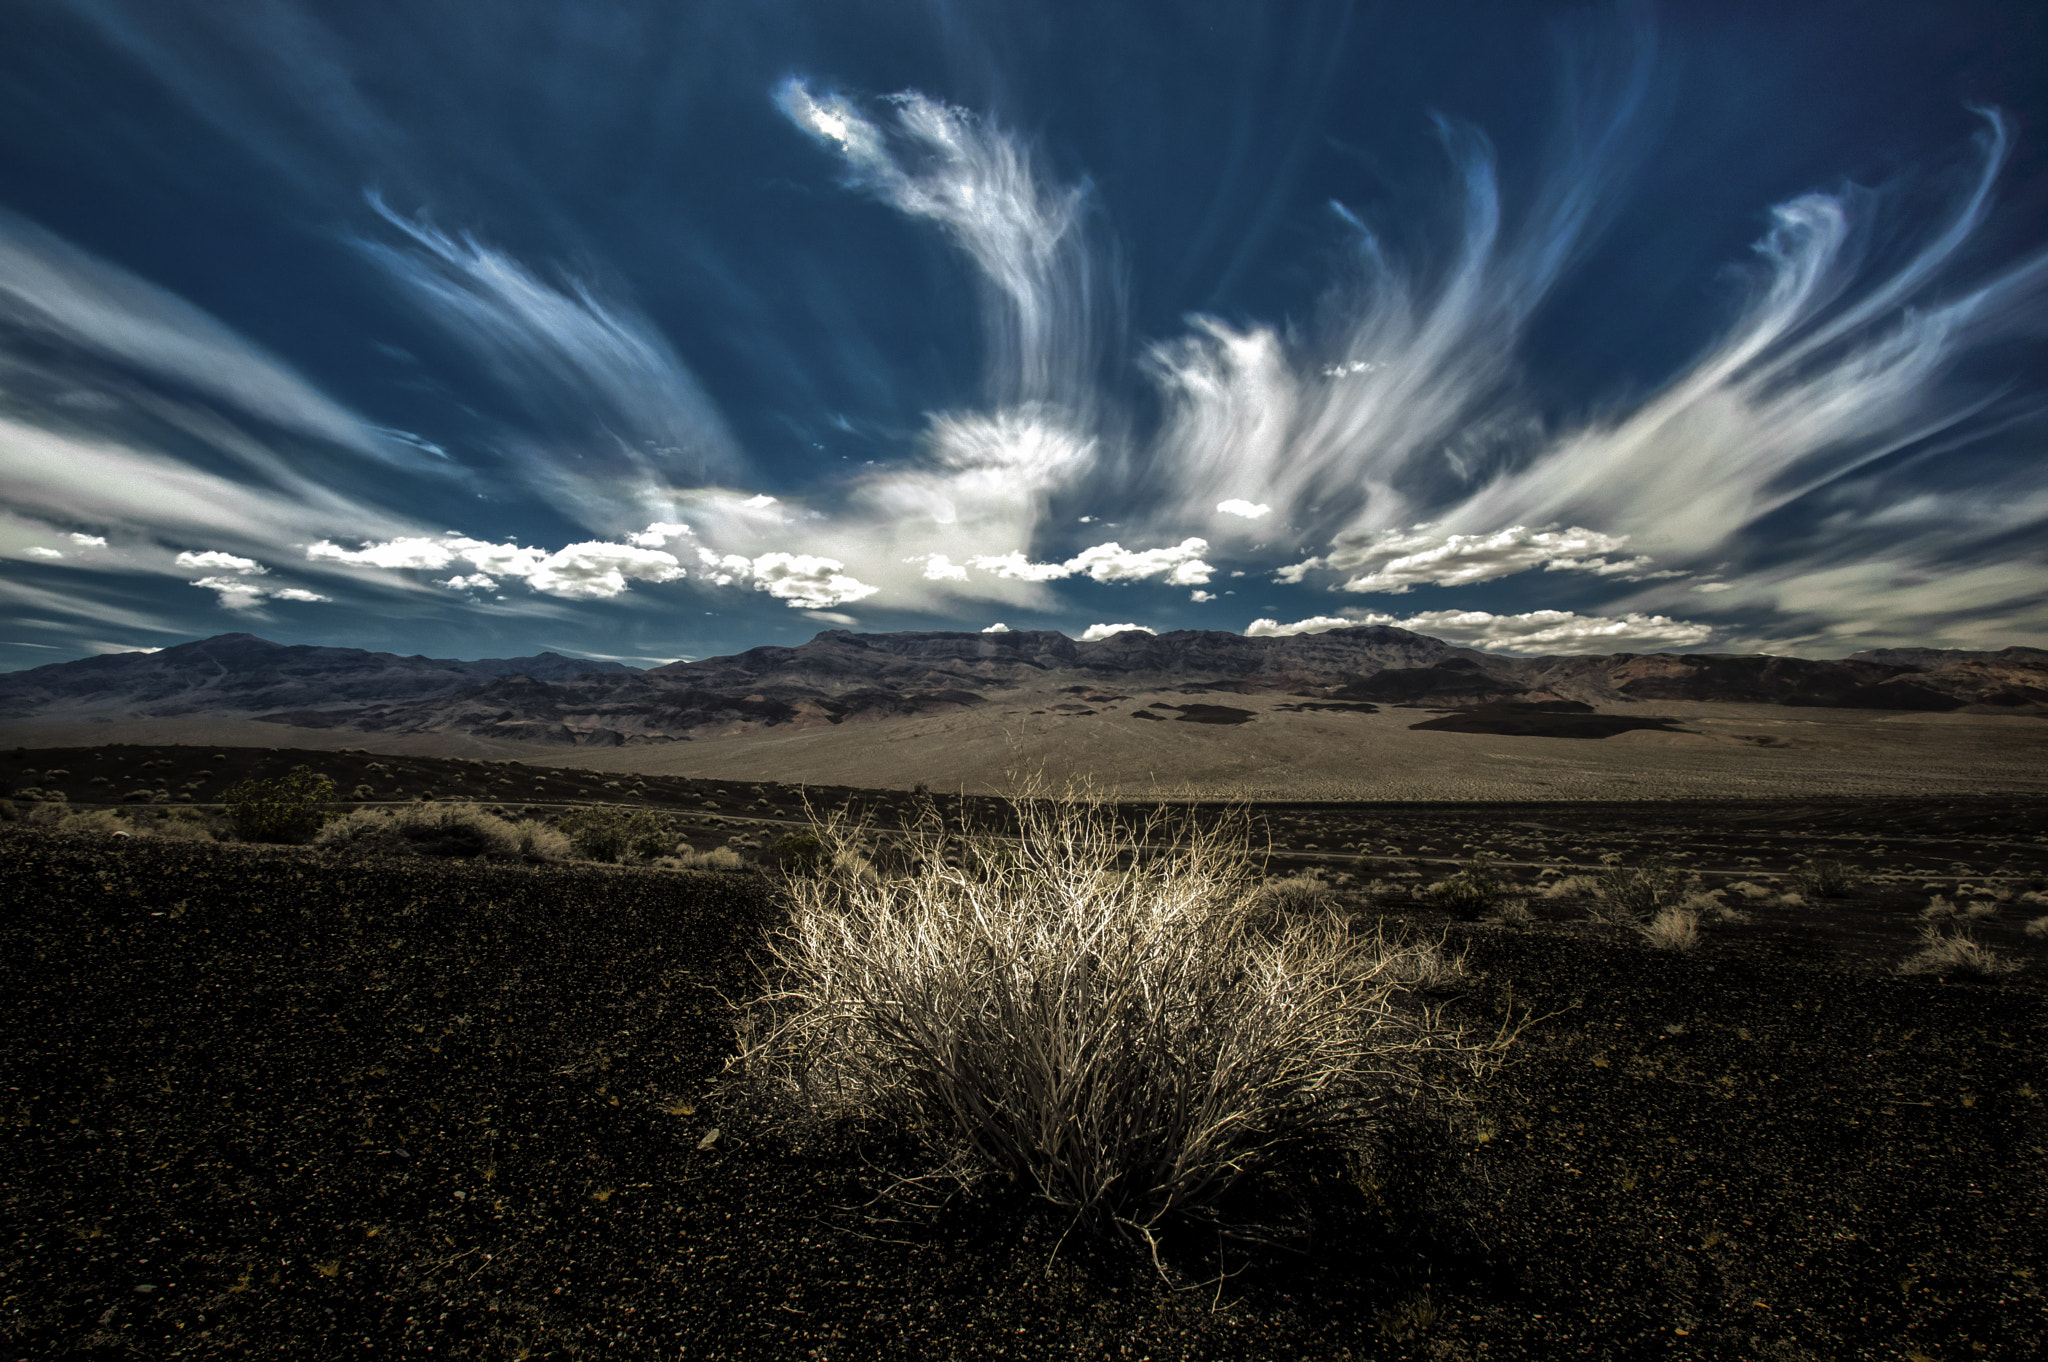 Pentax K-3 II + Tamron SP AF 10-24mm F3.5-4.5 Di II LD Aspherical (IF) sample photo. Death valley photography